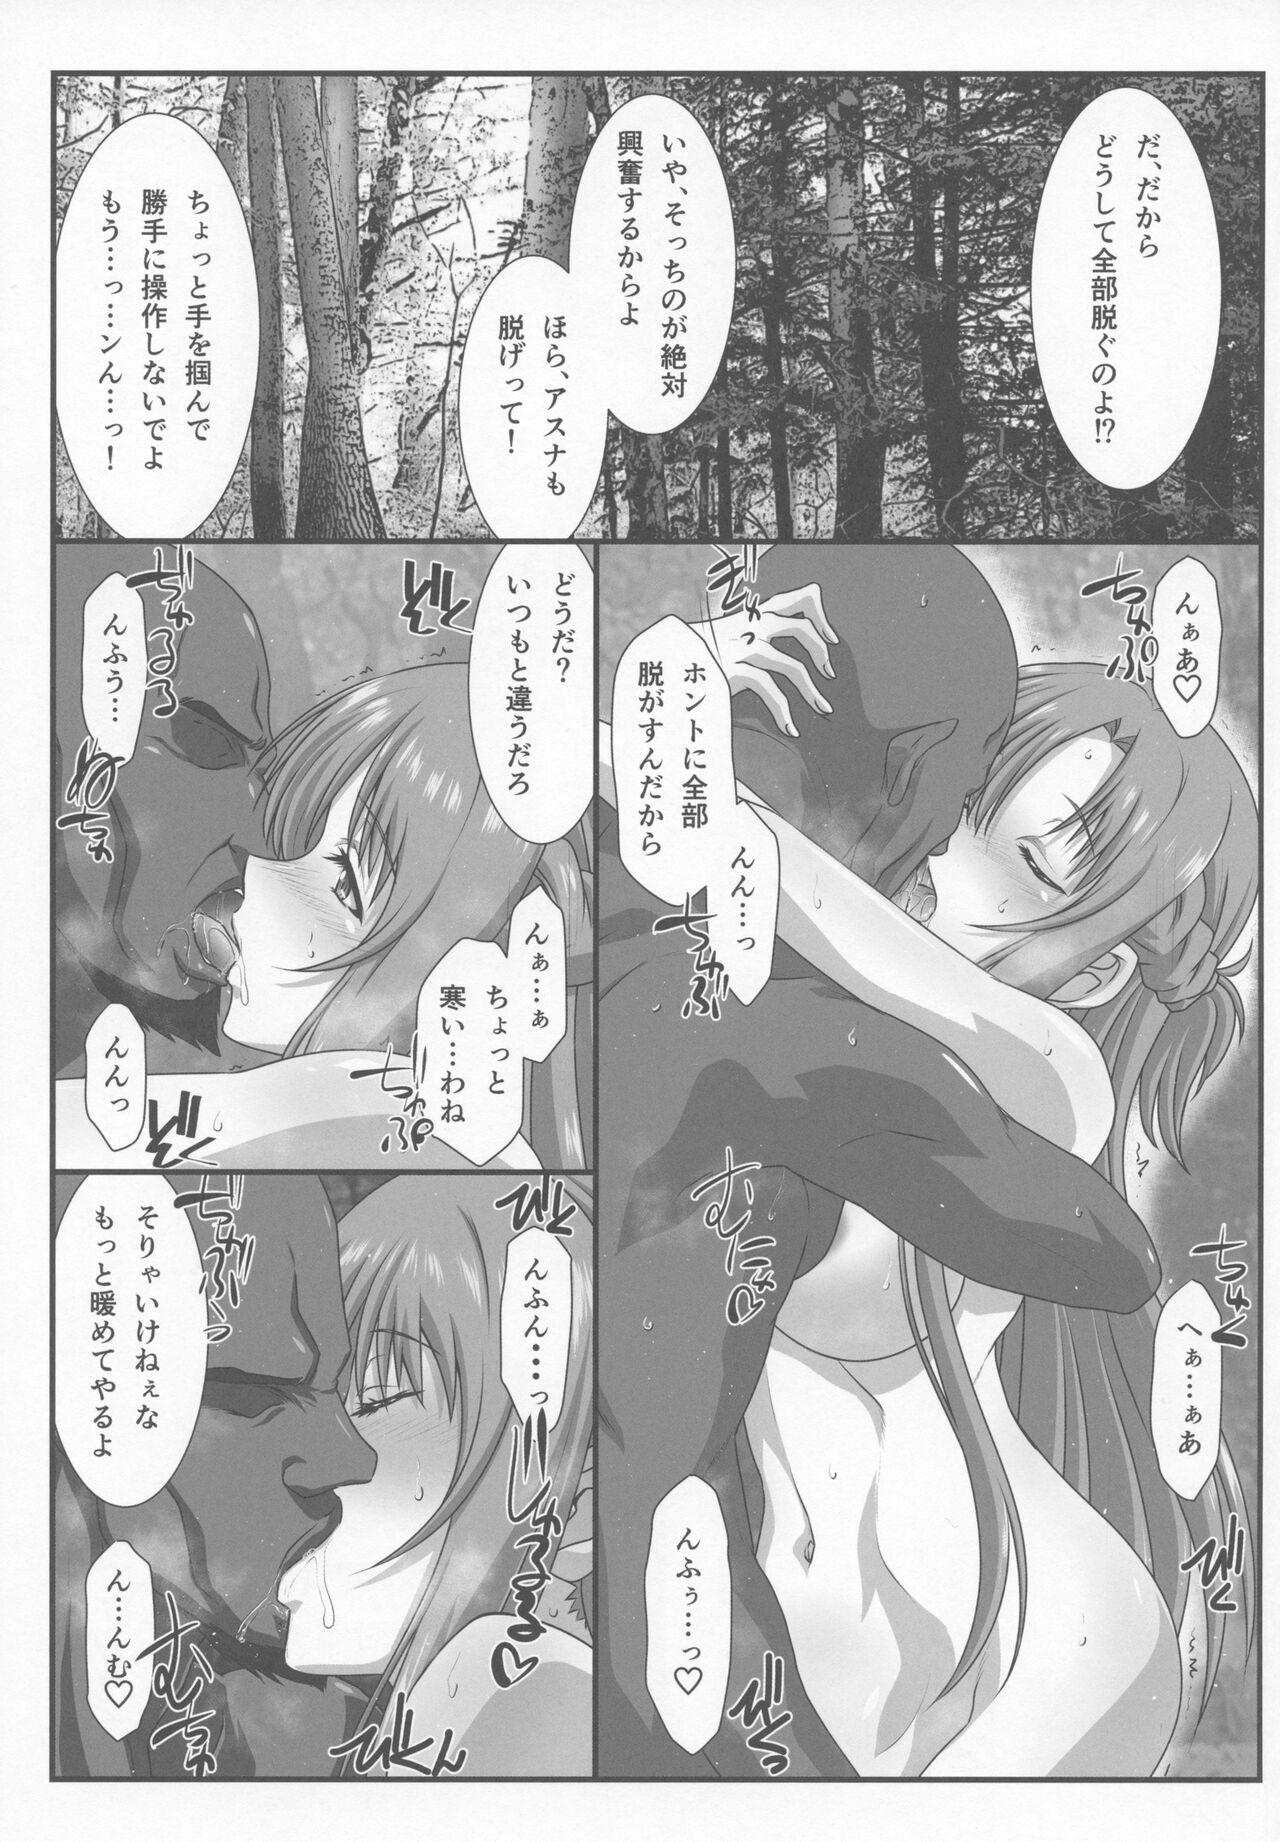 Shy Astral Bout Ver. 45 - Sword art online Blond - Page 4